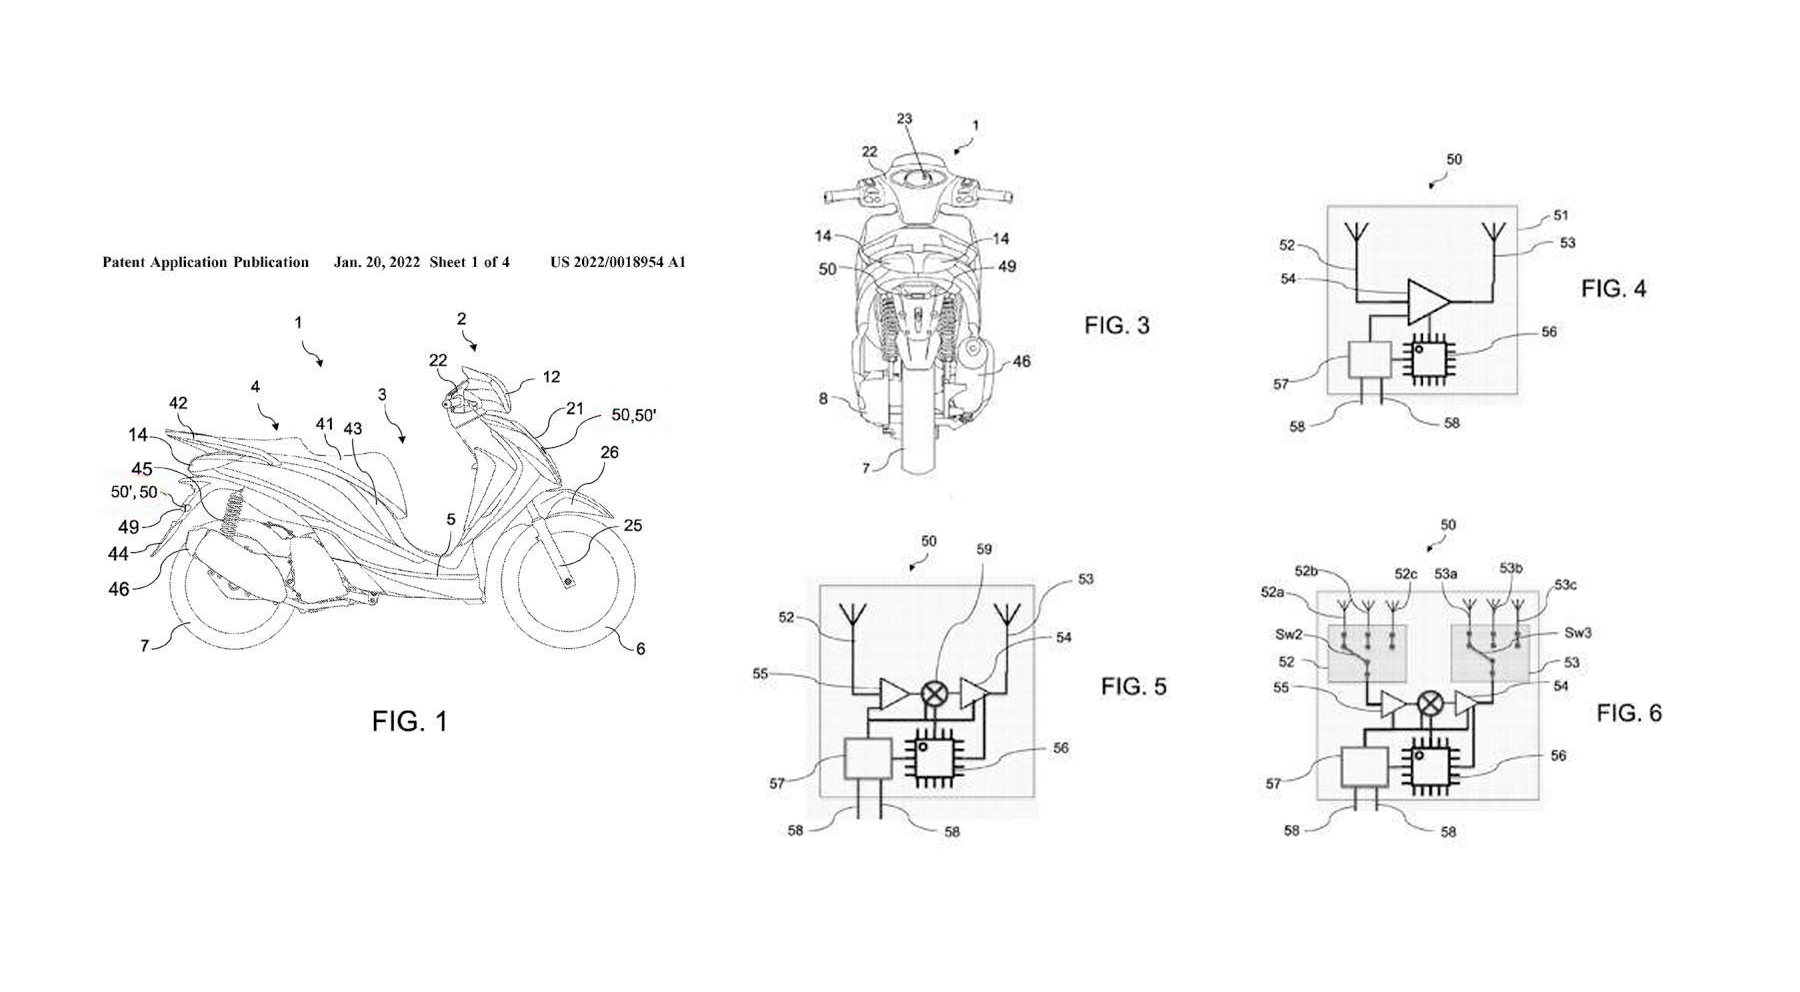 Piaggio patents a radar against 'invisible' motorcycles